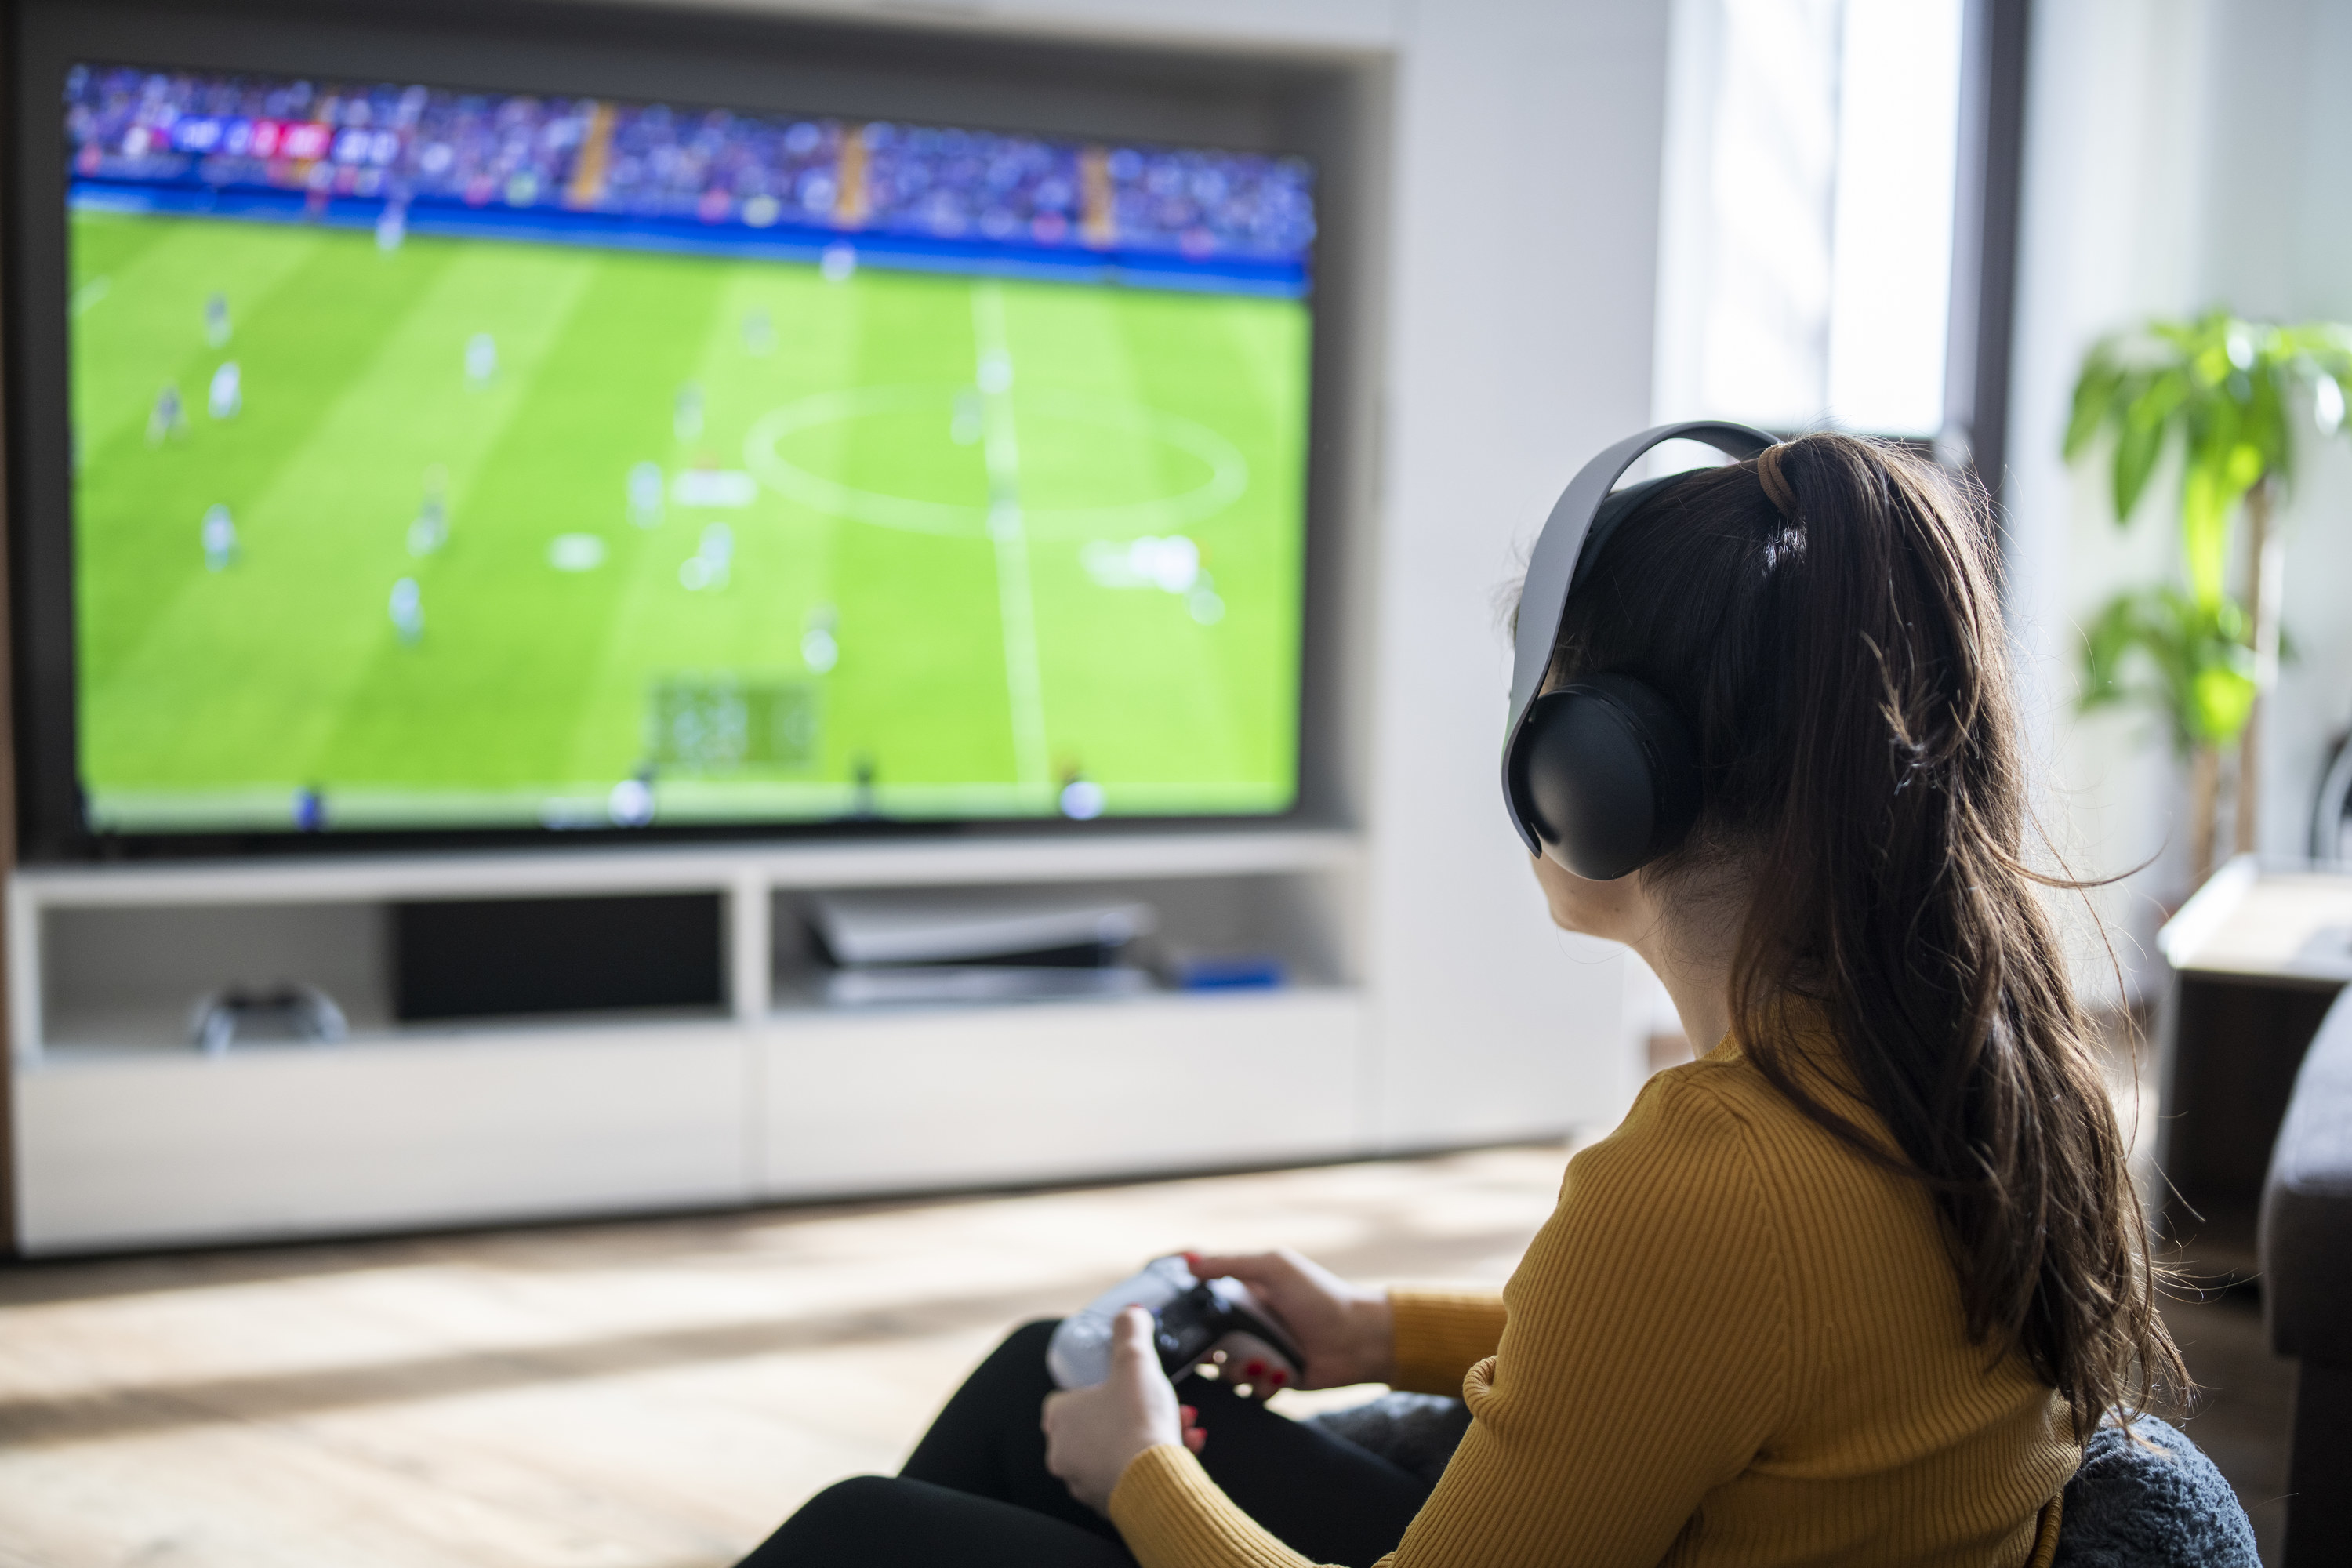 Rear view of woman playing football game on a gaming console at home